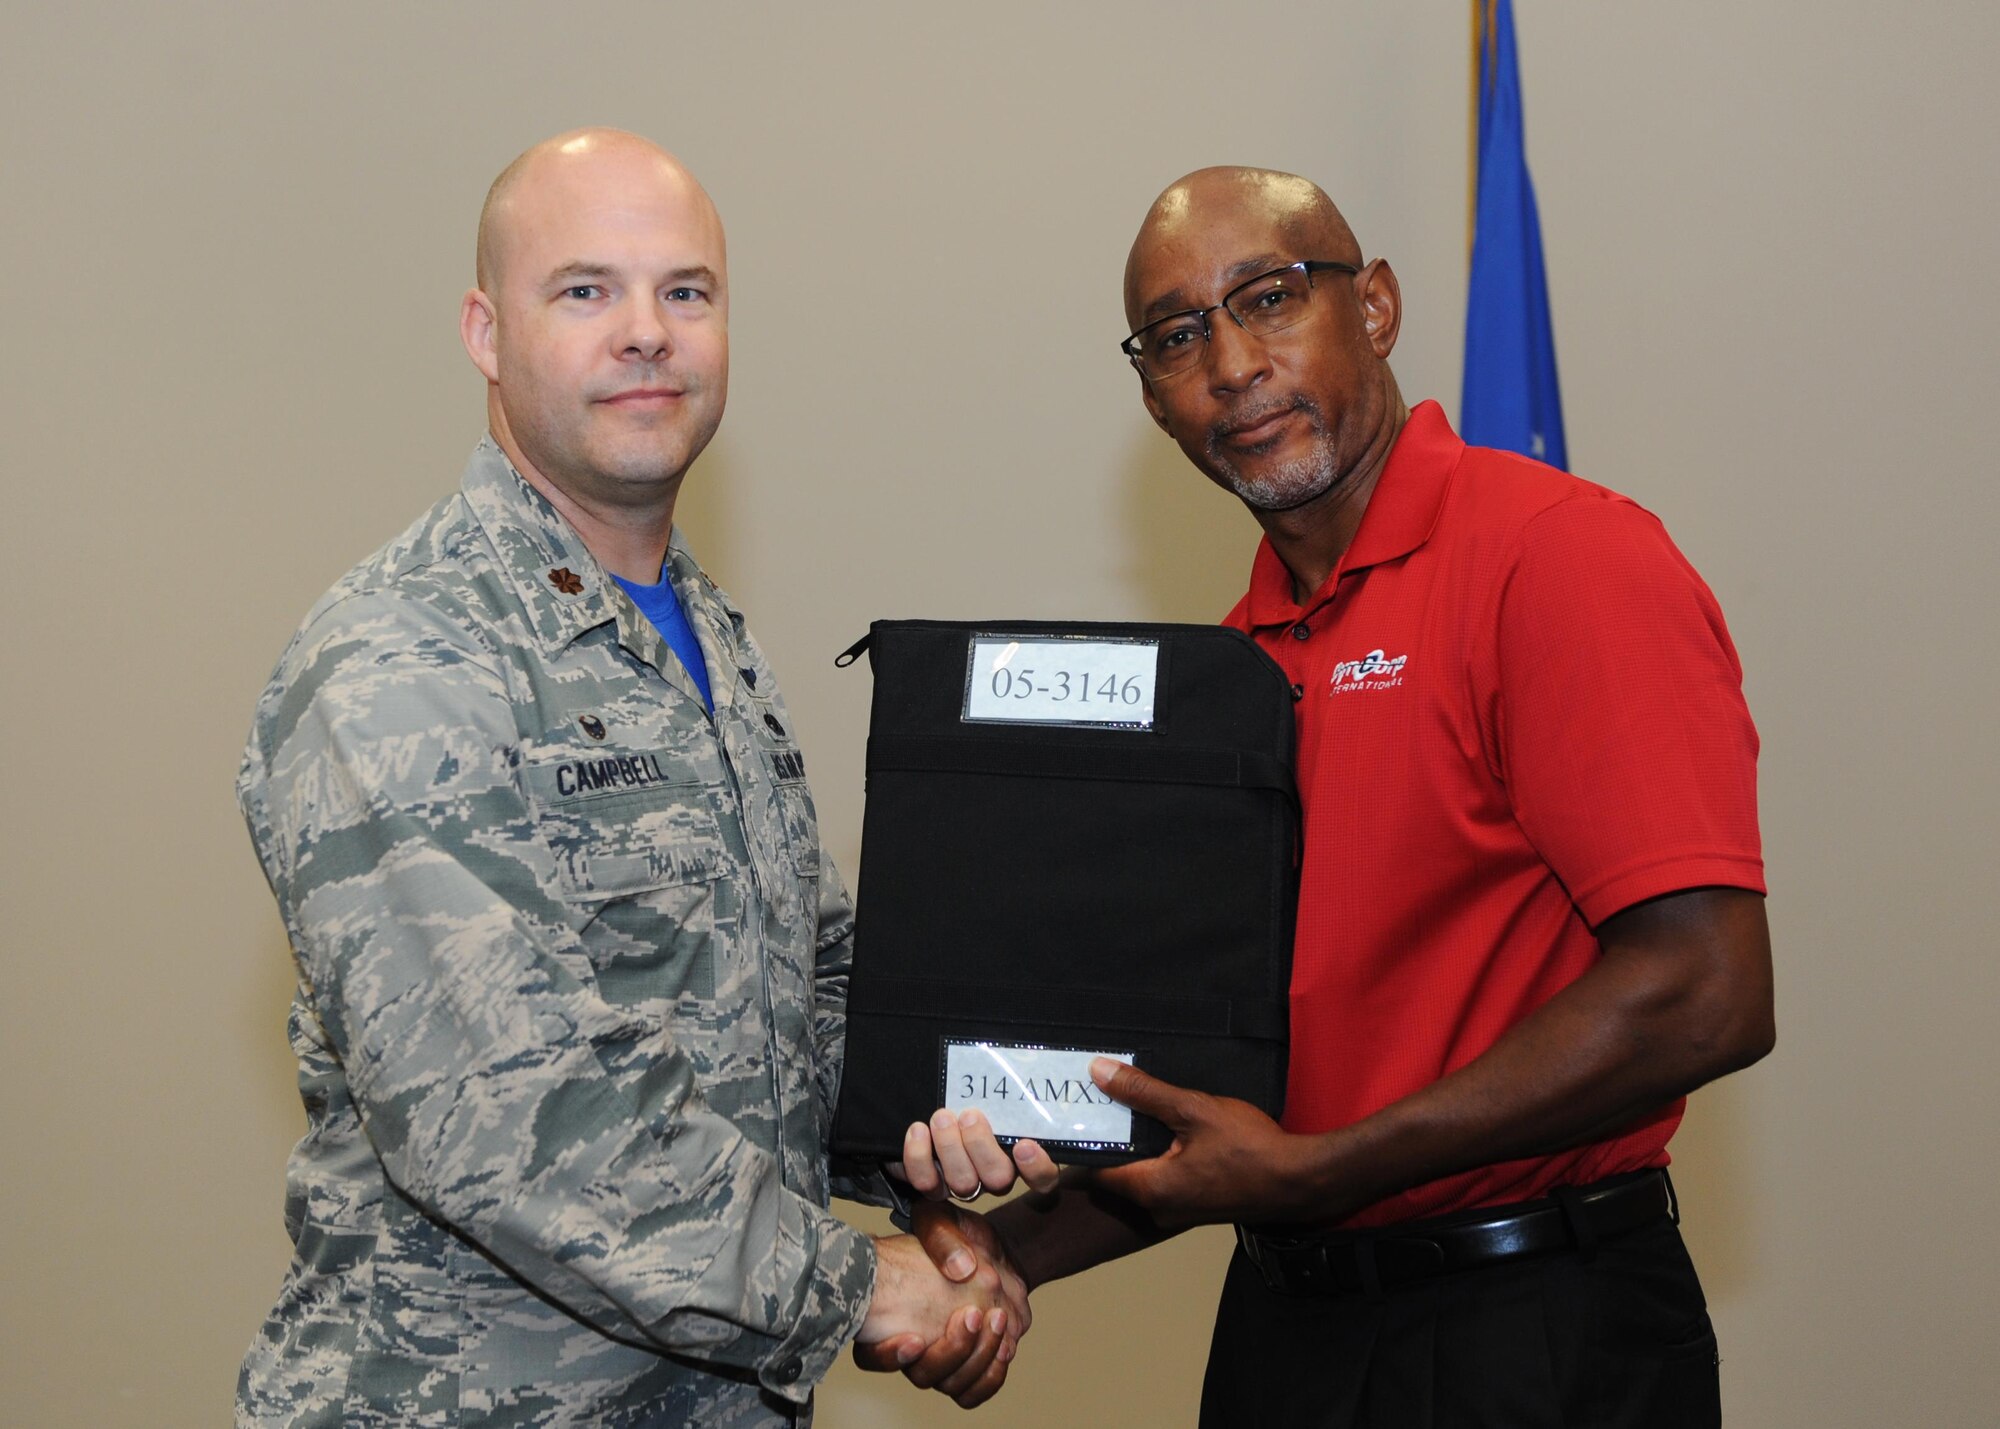 Maj. Paul Campbell, 314th Aircraft Maintenance Squadron commander, presents Joseph Lowe, DynCorp International contractor, a binder June 30, 2017, at Little Rock Air Force Base, Ark. The presentation of the binder signifies the end of a six-month transition between the 314th AMXS Airmen and DynCorp International employees. (U.S. Air Force photo by Airman 1st Class Grace Nichols)